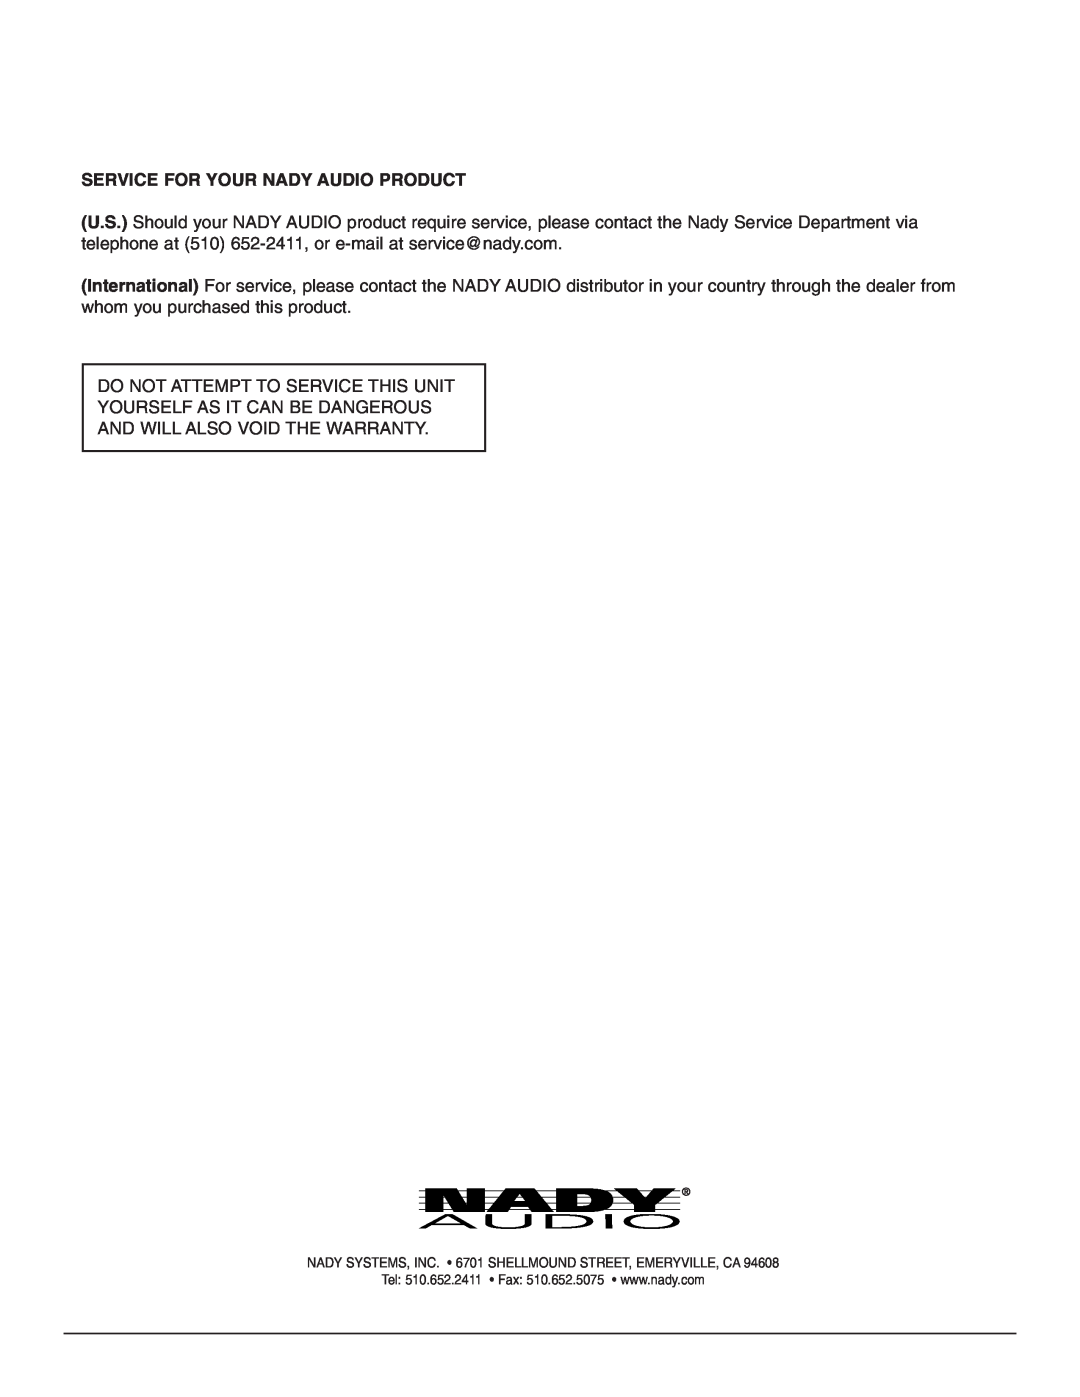 Nady Systems SMA-2130 owner manual Service For Your Nady Audio Product 